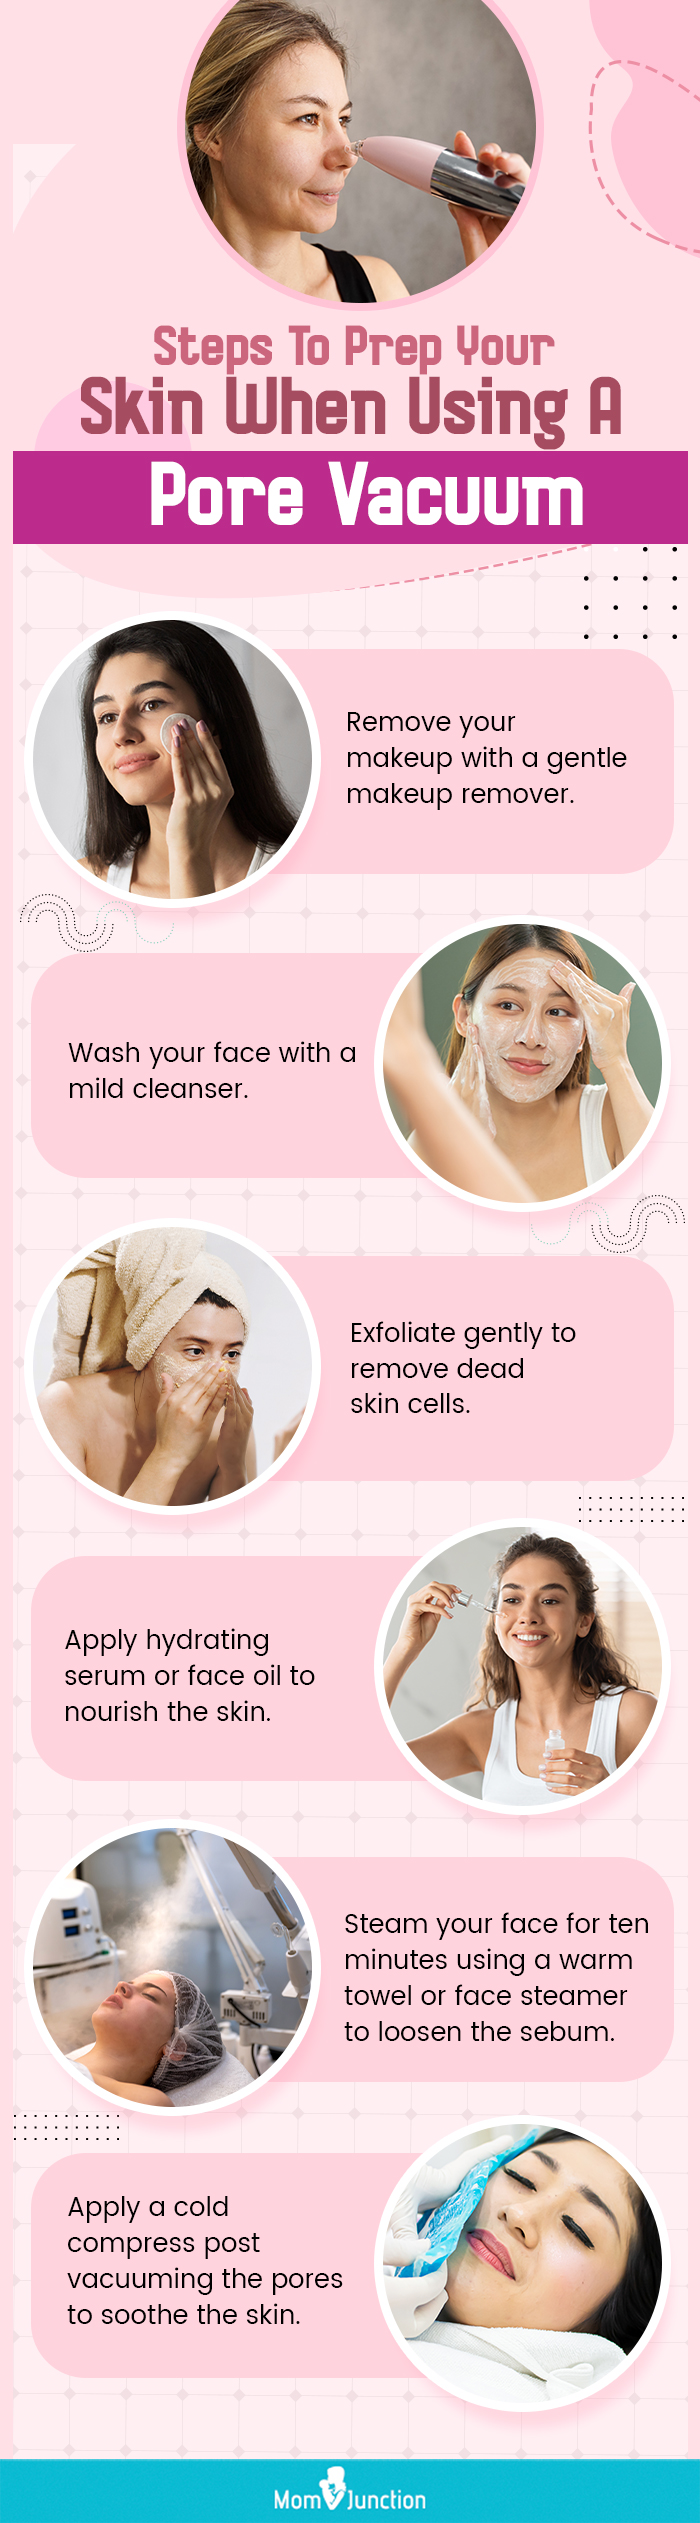 Steps To Prep Your Skin When Using A Pore Vacuum (infographic)